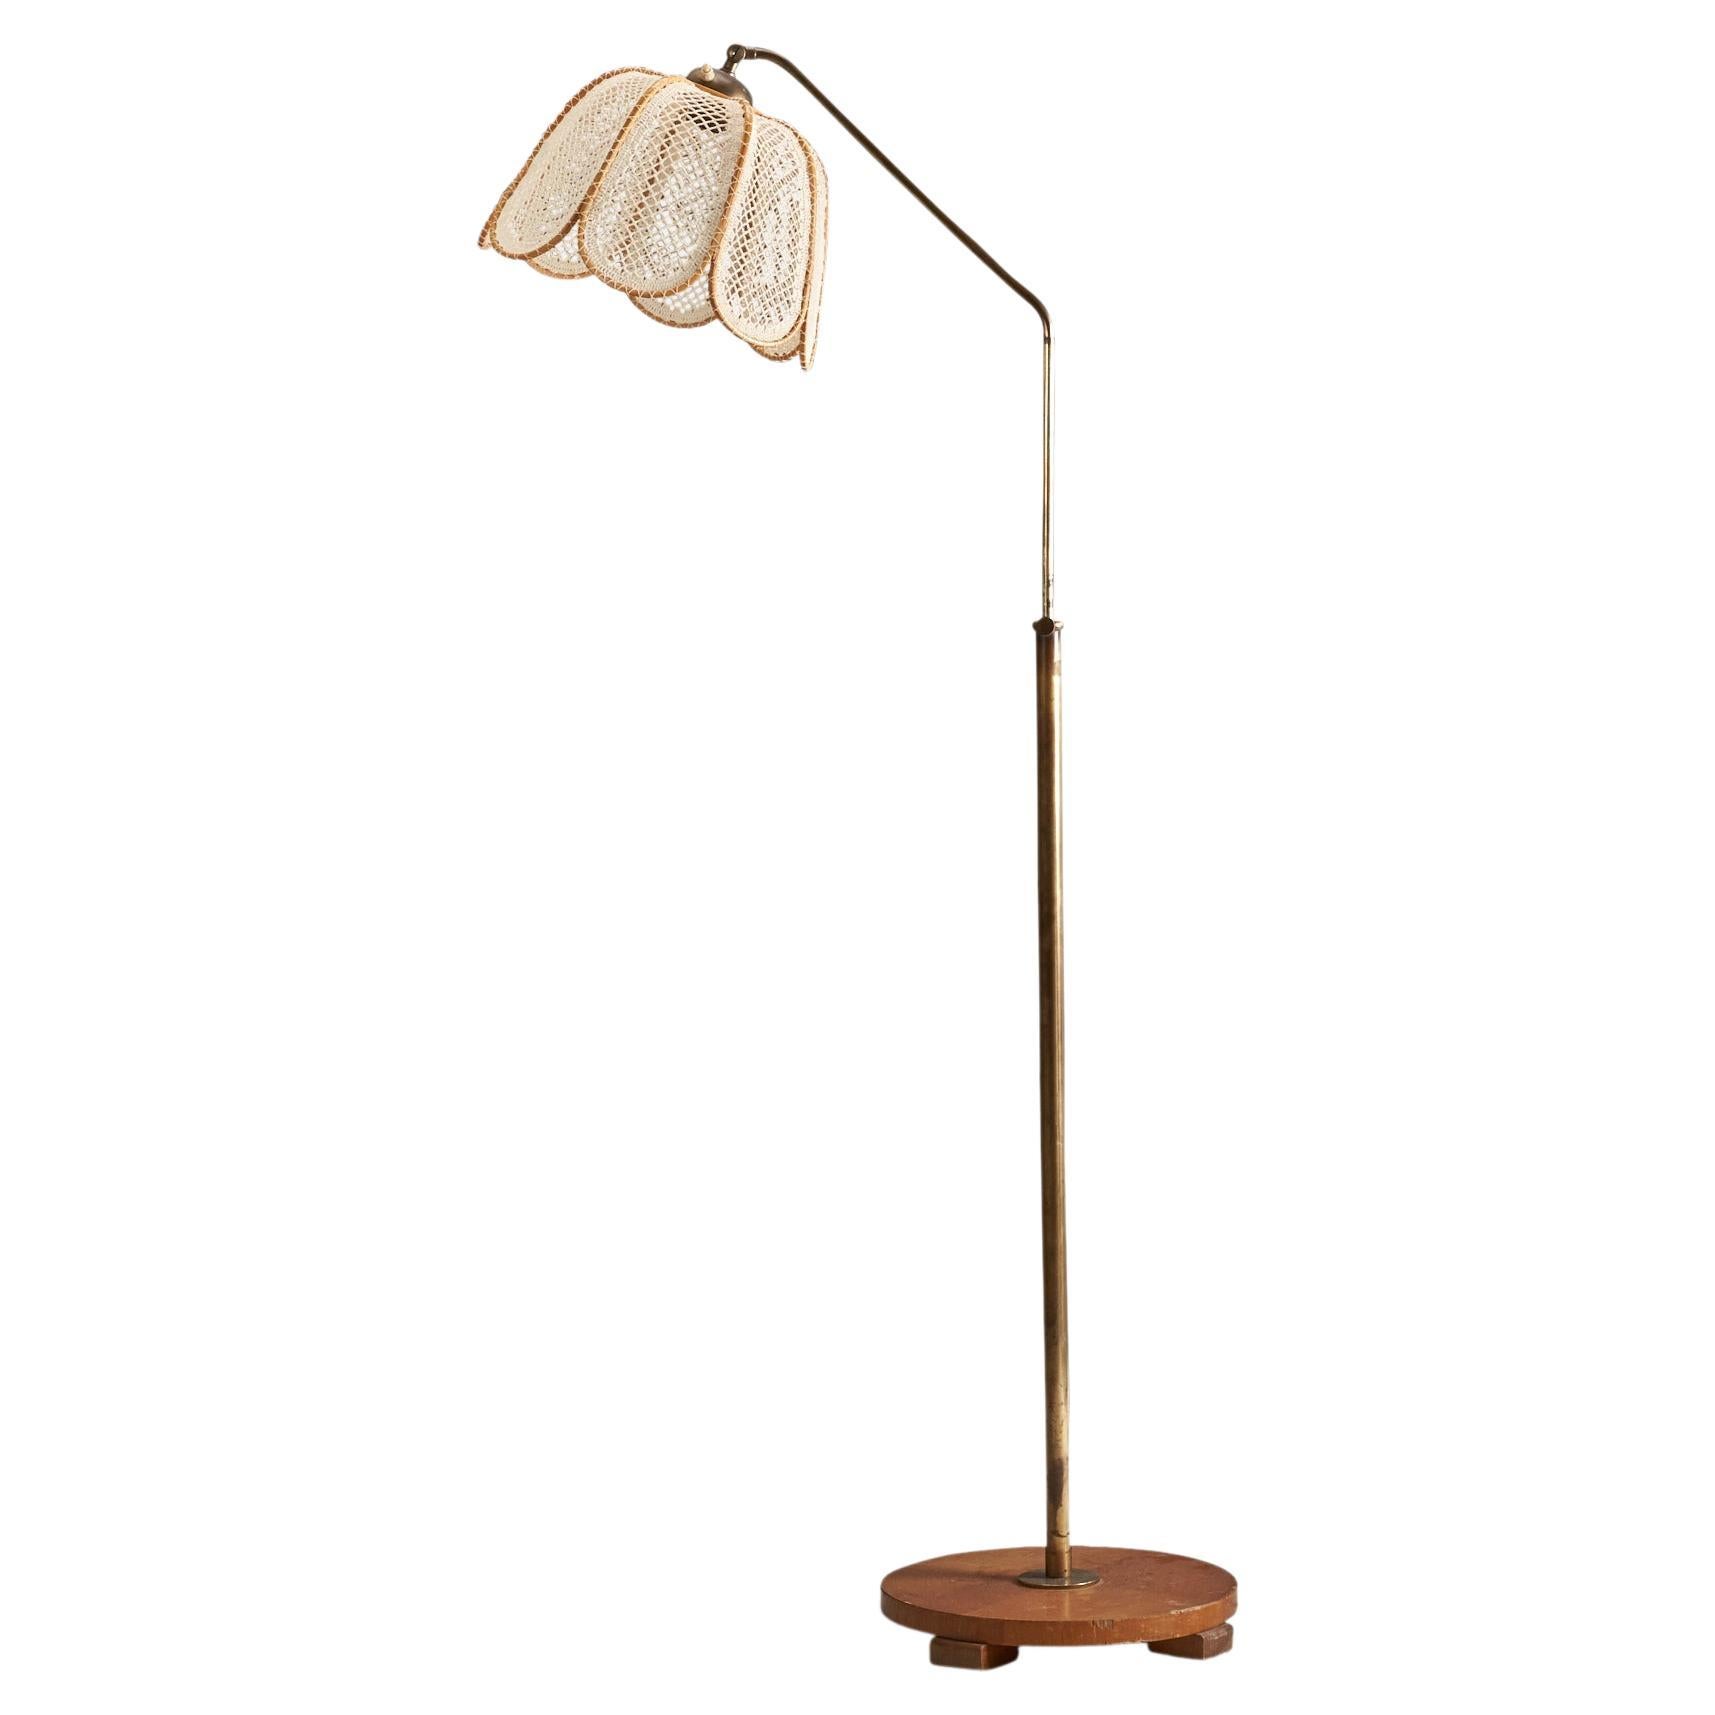 Swedish Designer, Floor Lamp, Brass, Wood, Embroidery Fabric, Sweden, 1940s For Sale